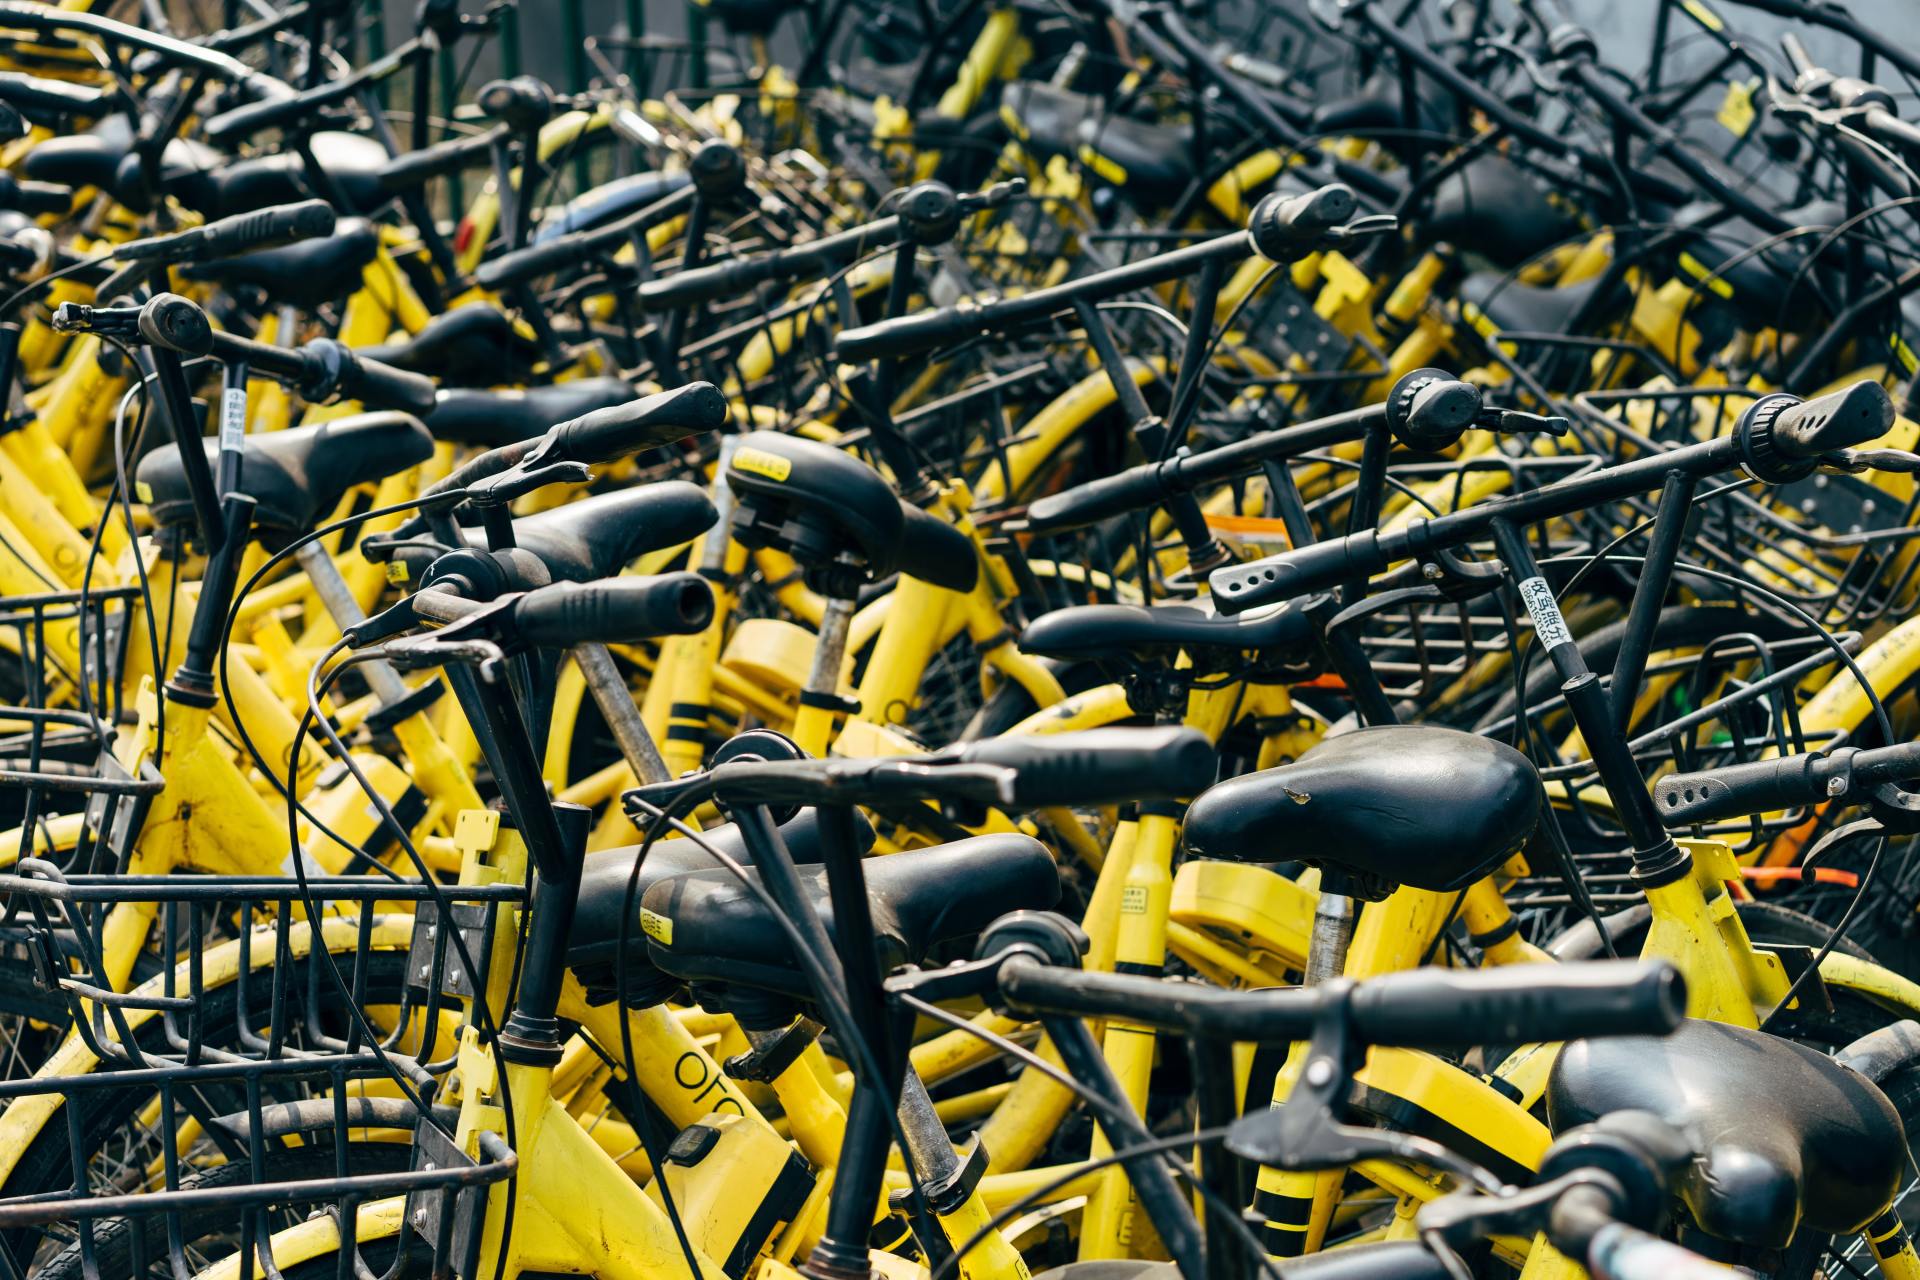 How to start a bike-sharing business